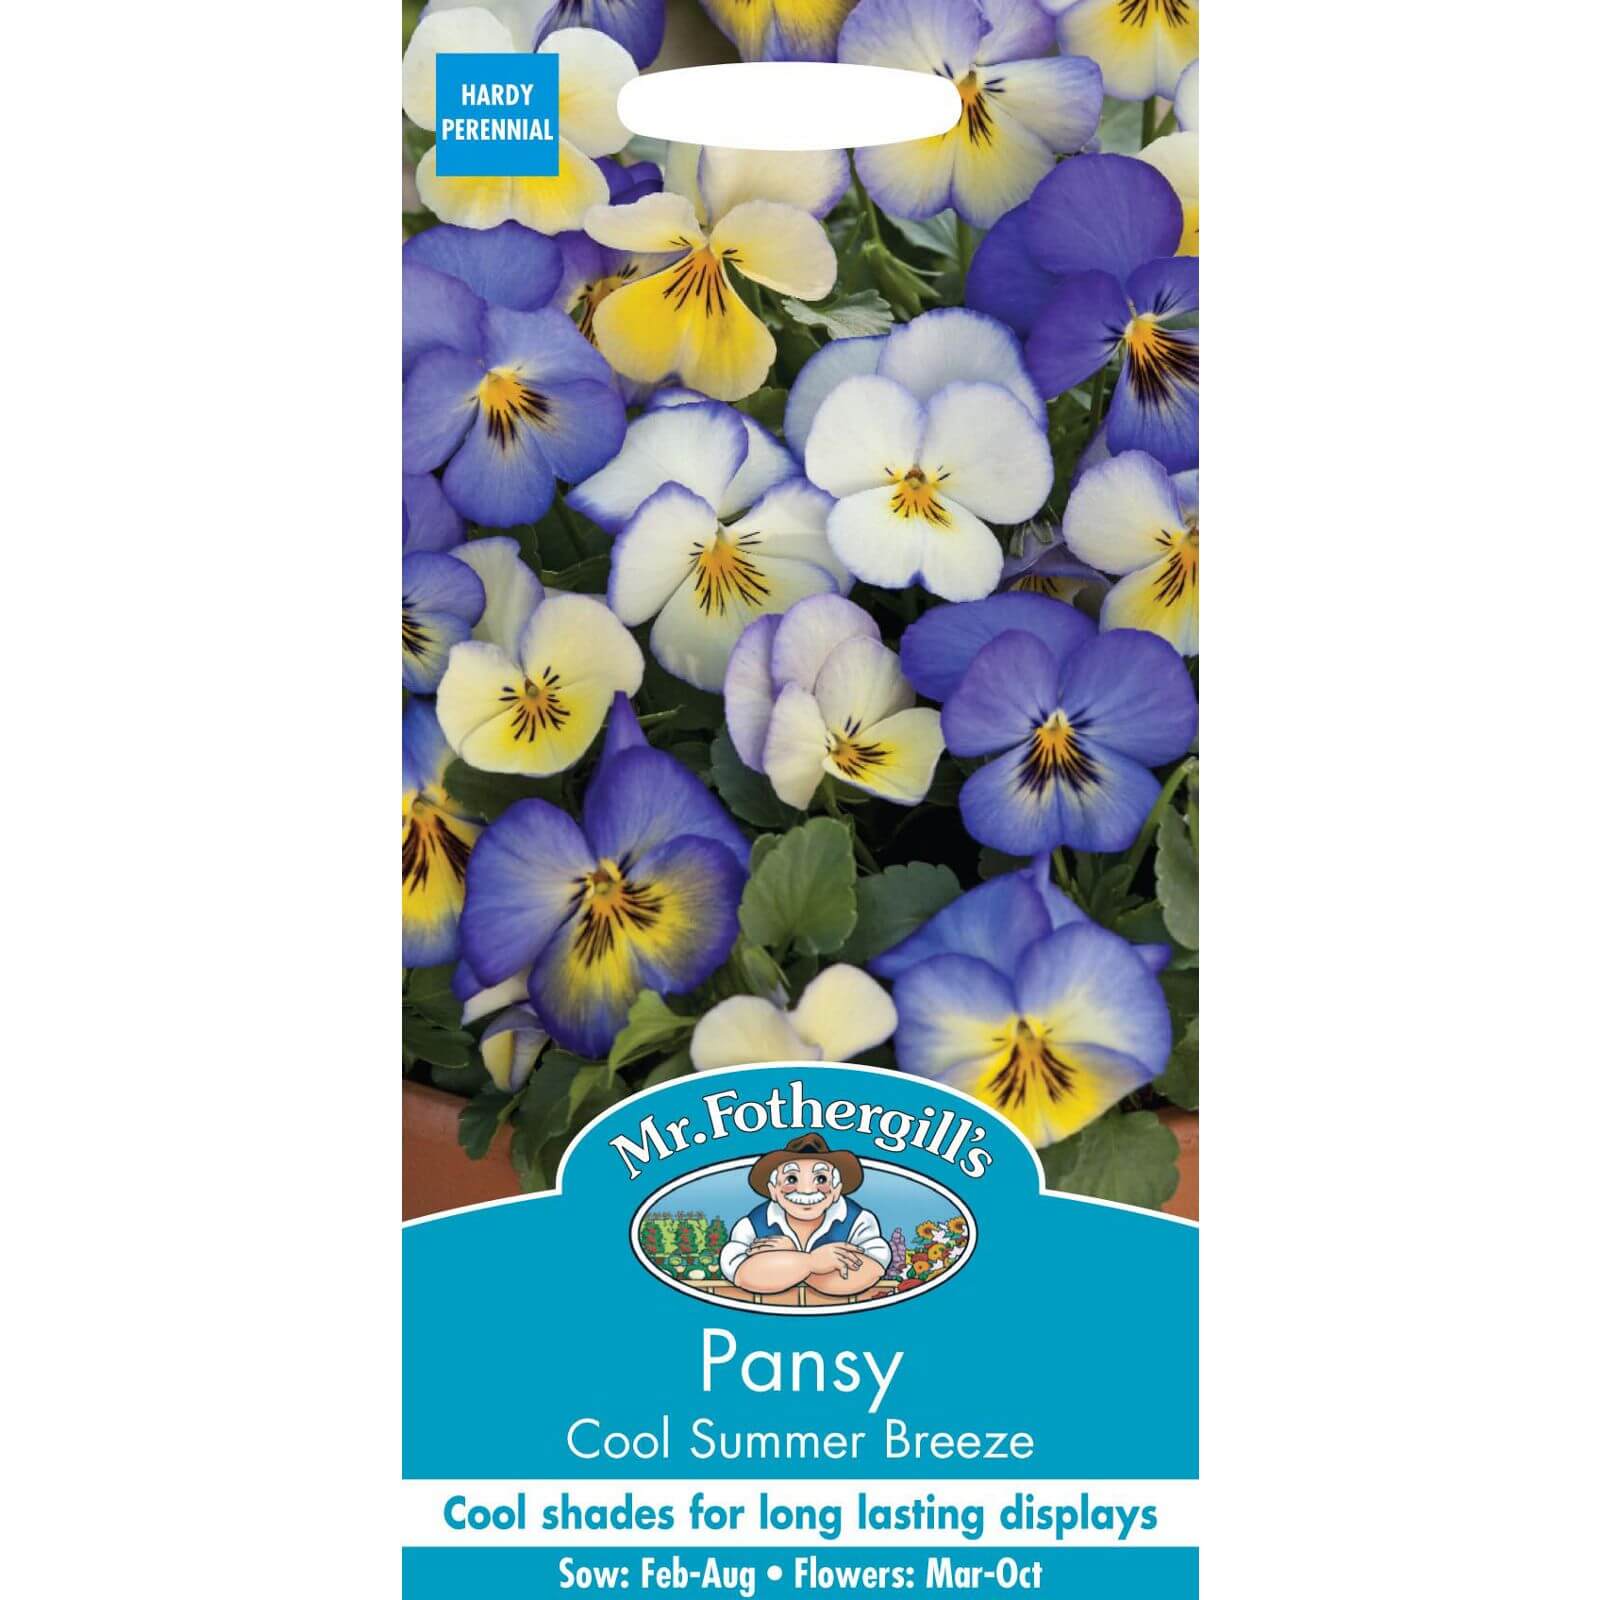 Mr. Fothergill's Pansy Cool Summer Breeze Seeds